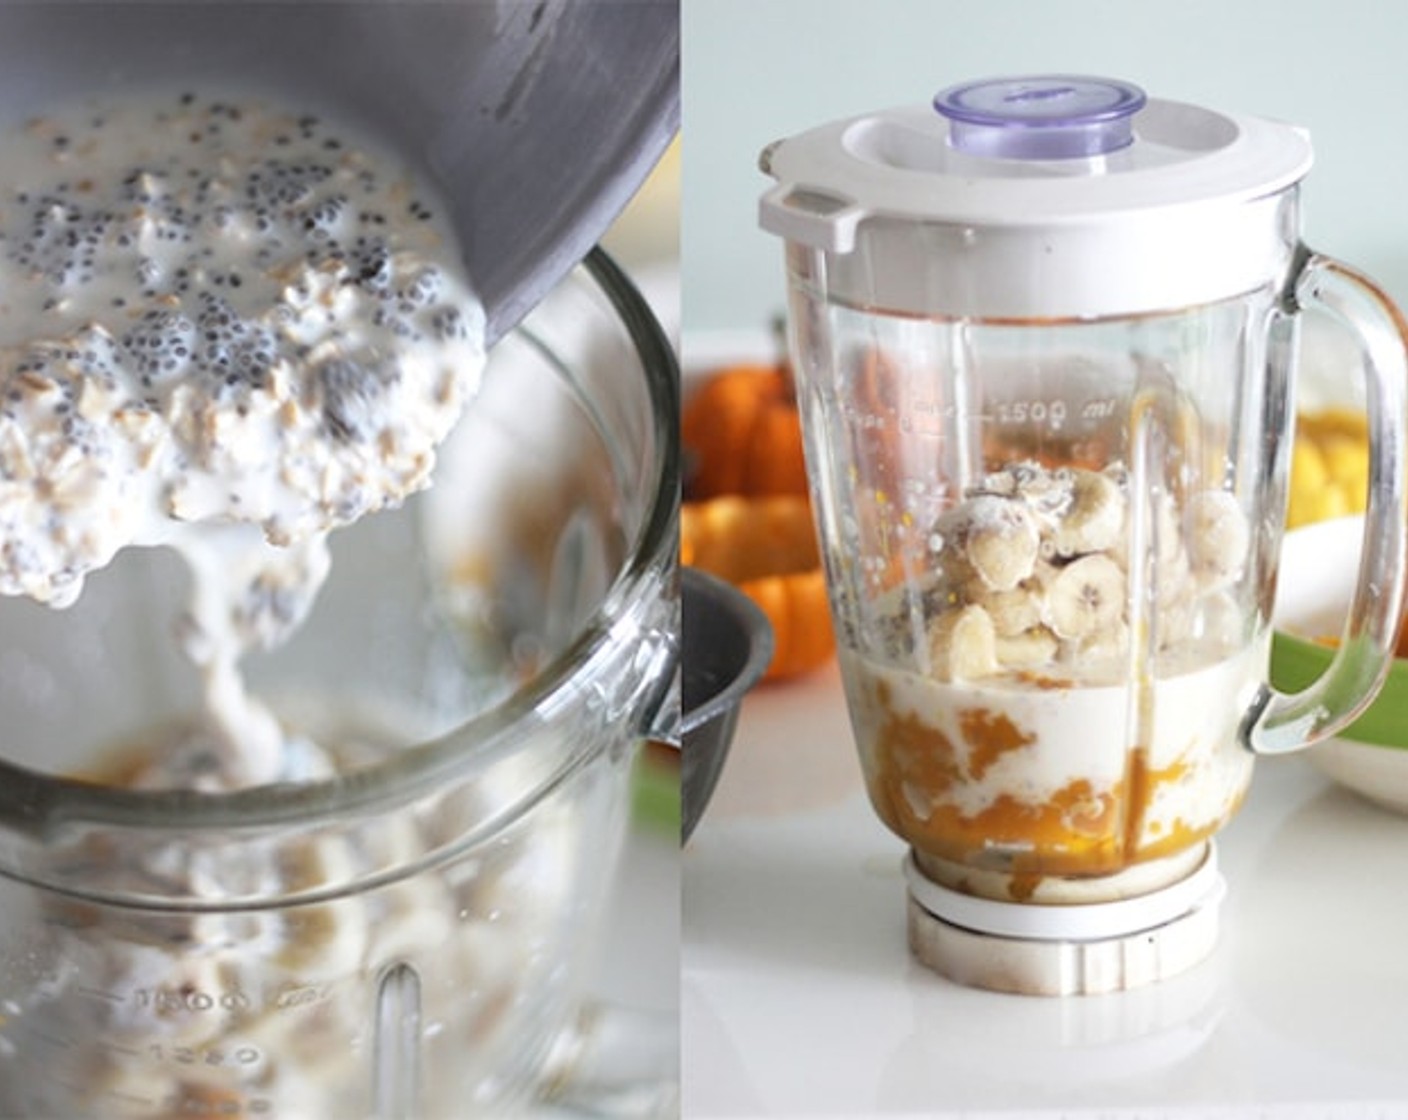 step 11 Put the soaked oats ingredients in the fridge, pumpkin puree, Maple Syrup (1 1/2 Tbsp), Ground Cinnamon (1/2 Tbsp), Ground Nutmeg (1/4 tsp), and frozen bananas all into a blender, then blend it until all mixture is combined. Should take around 2-3 minutes.